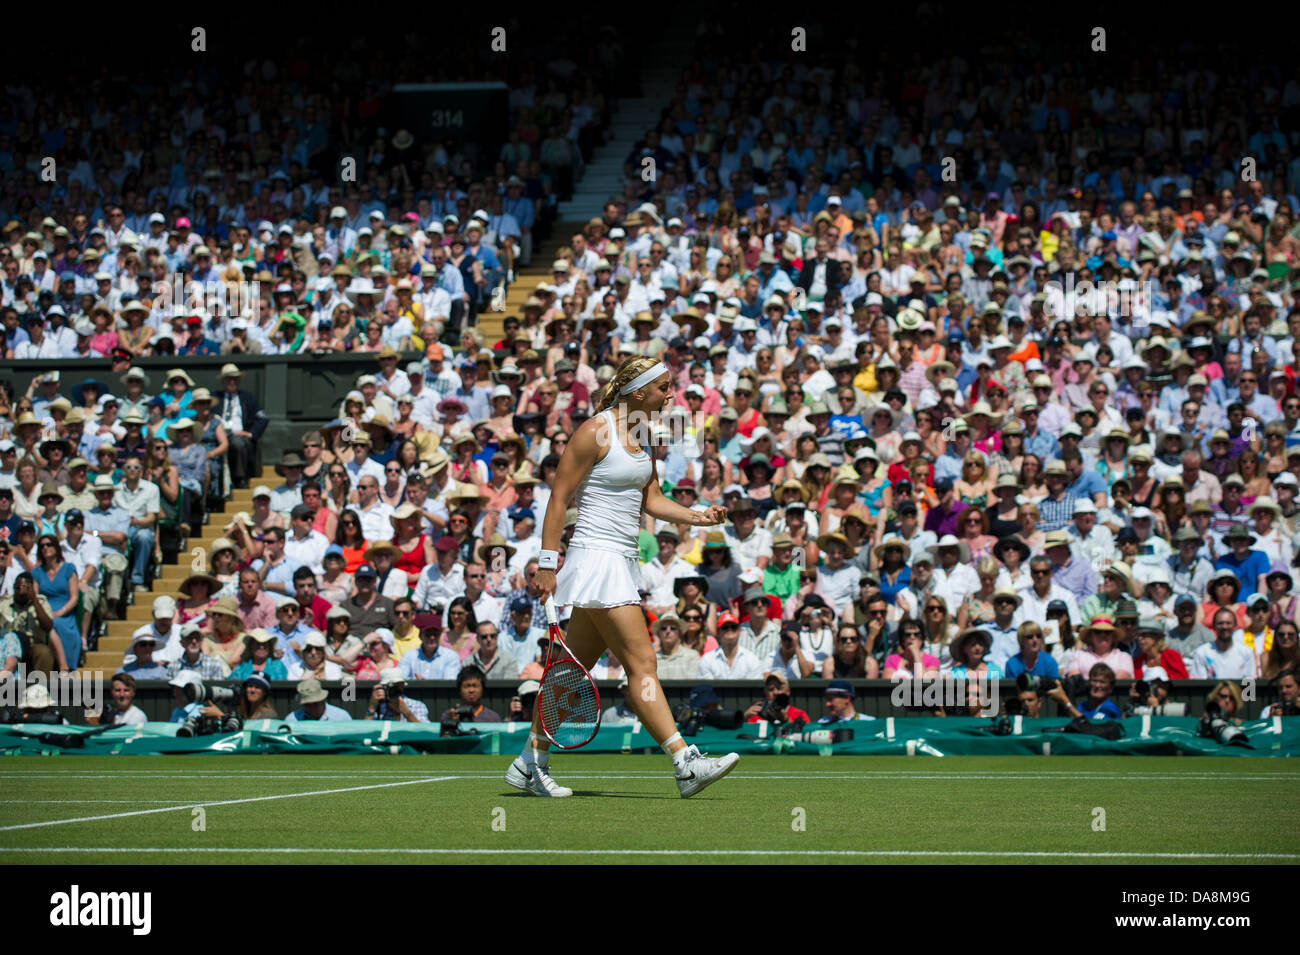 Tennis: Wimbledon Championship 2013, Sabine Lisicki of Germany in action during the Ladies' Singles final match against Marion Bartoli of France on day twelve of the Wimbledon Lawn Tennis Championships at the All England Lawn Tennis and Croquet Club on July 6, 2013 in London, England. Credit:  dpa picture alliance/Alamy Live News Stock Photo